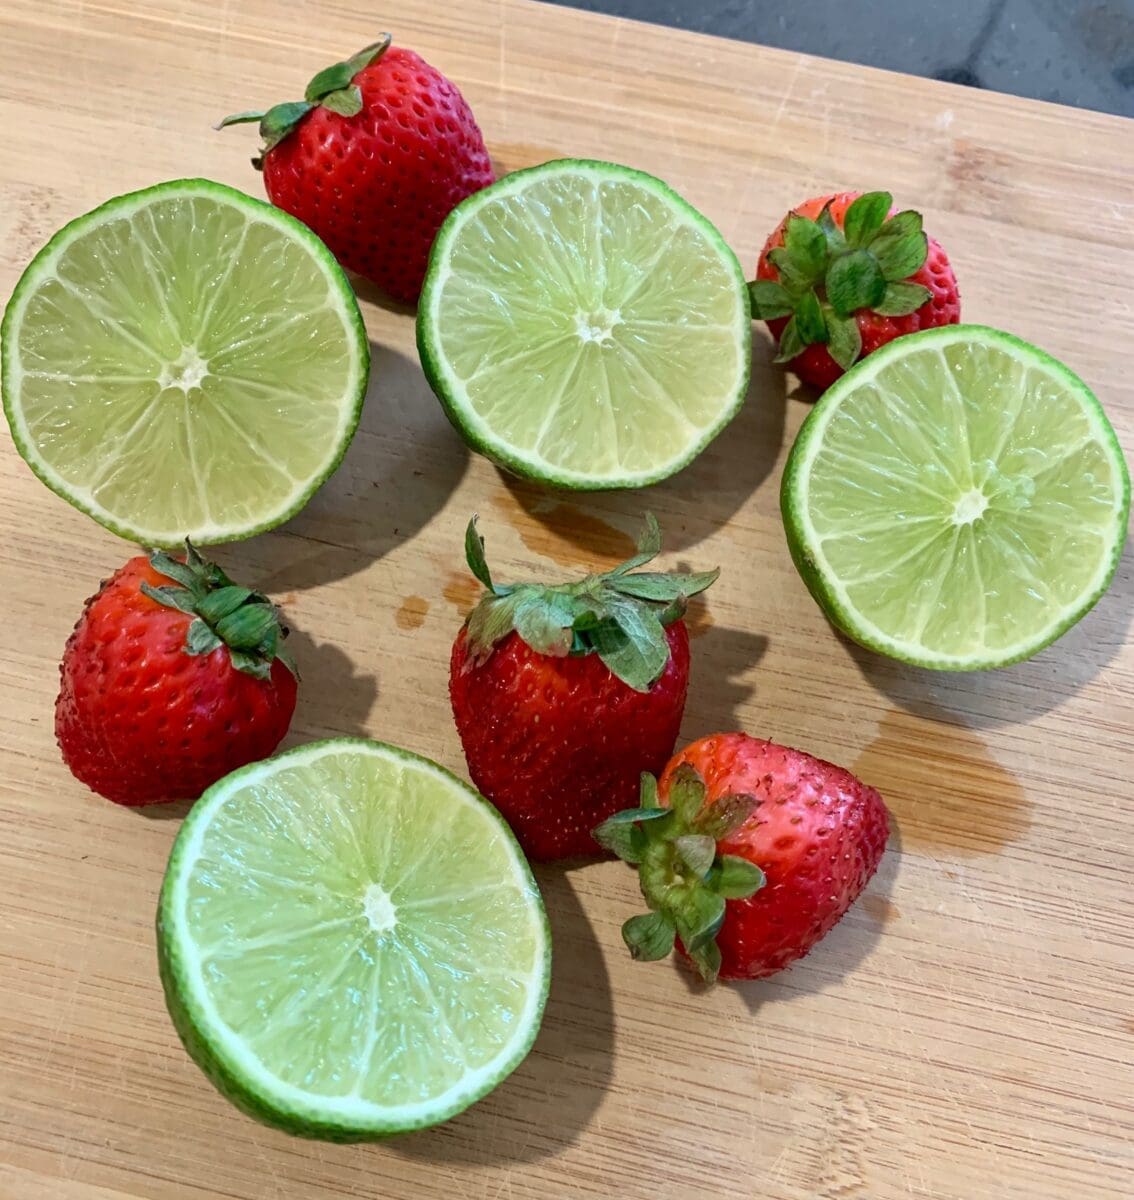 Strawberries and limes